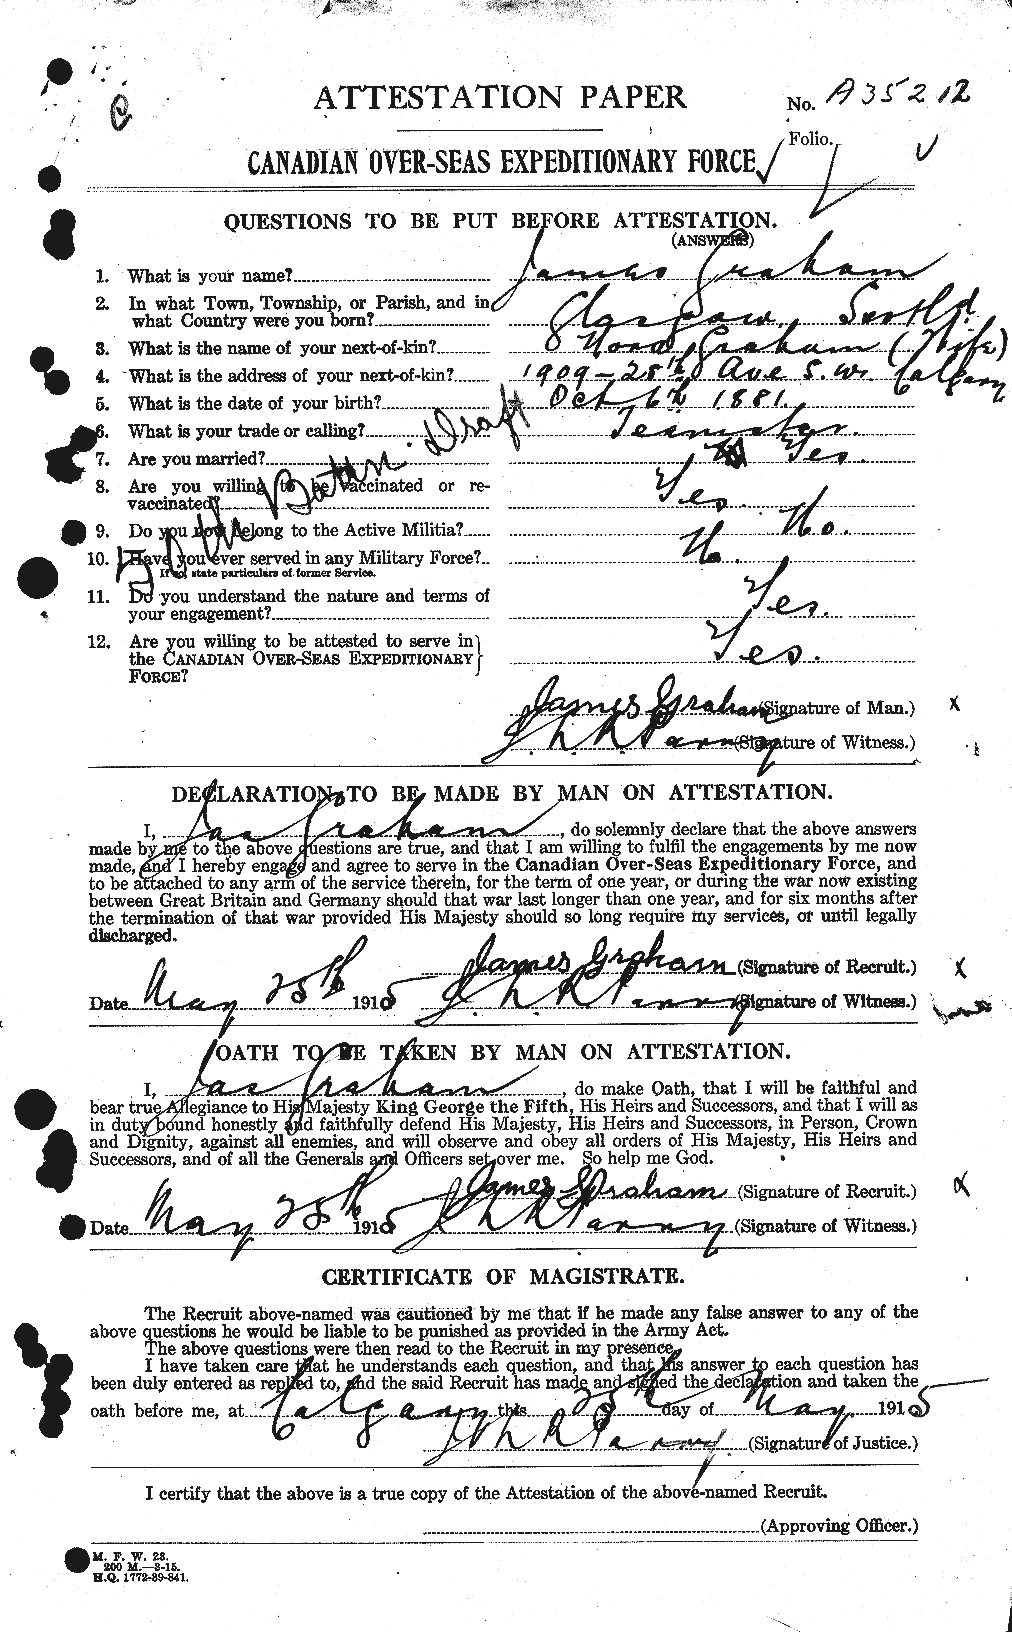 Personnel Records of the First World War - CEF 357791a